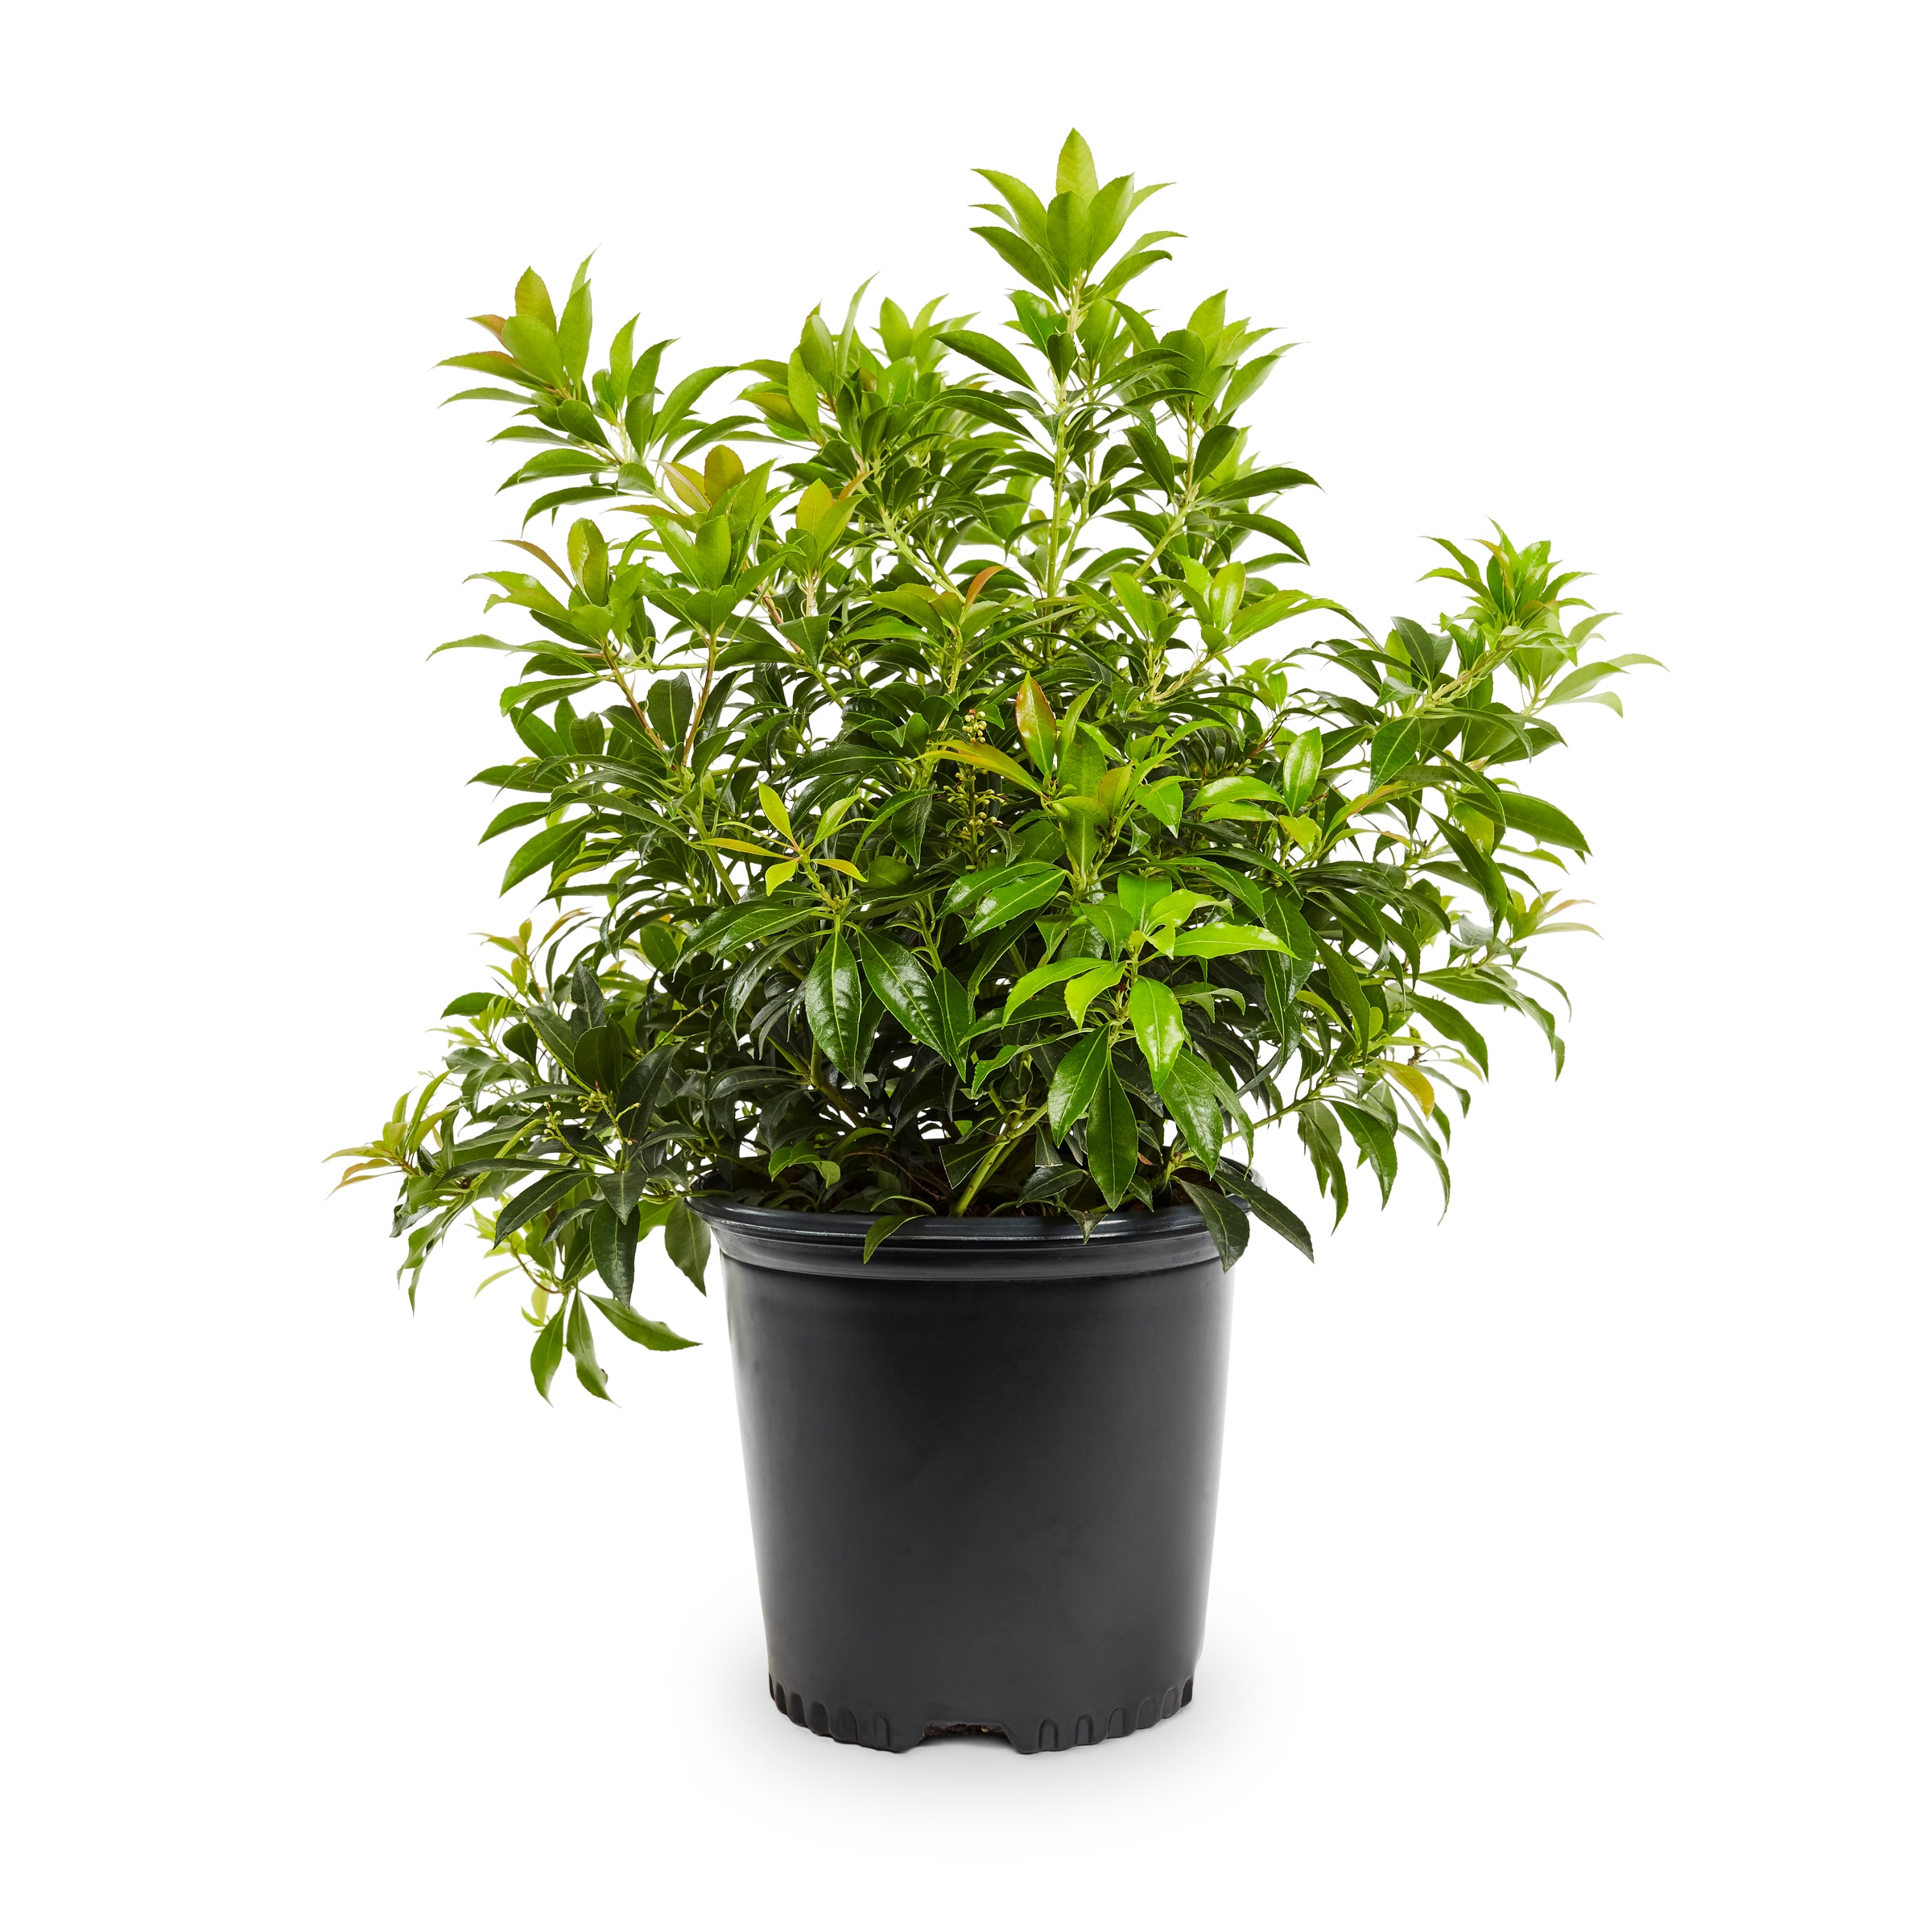 Image of Japonica shrub in pot